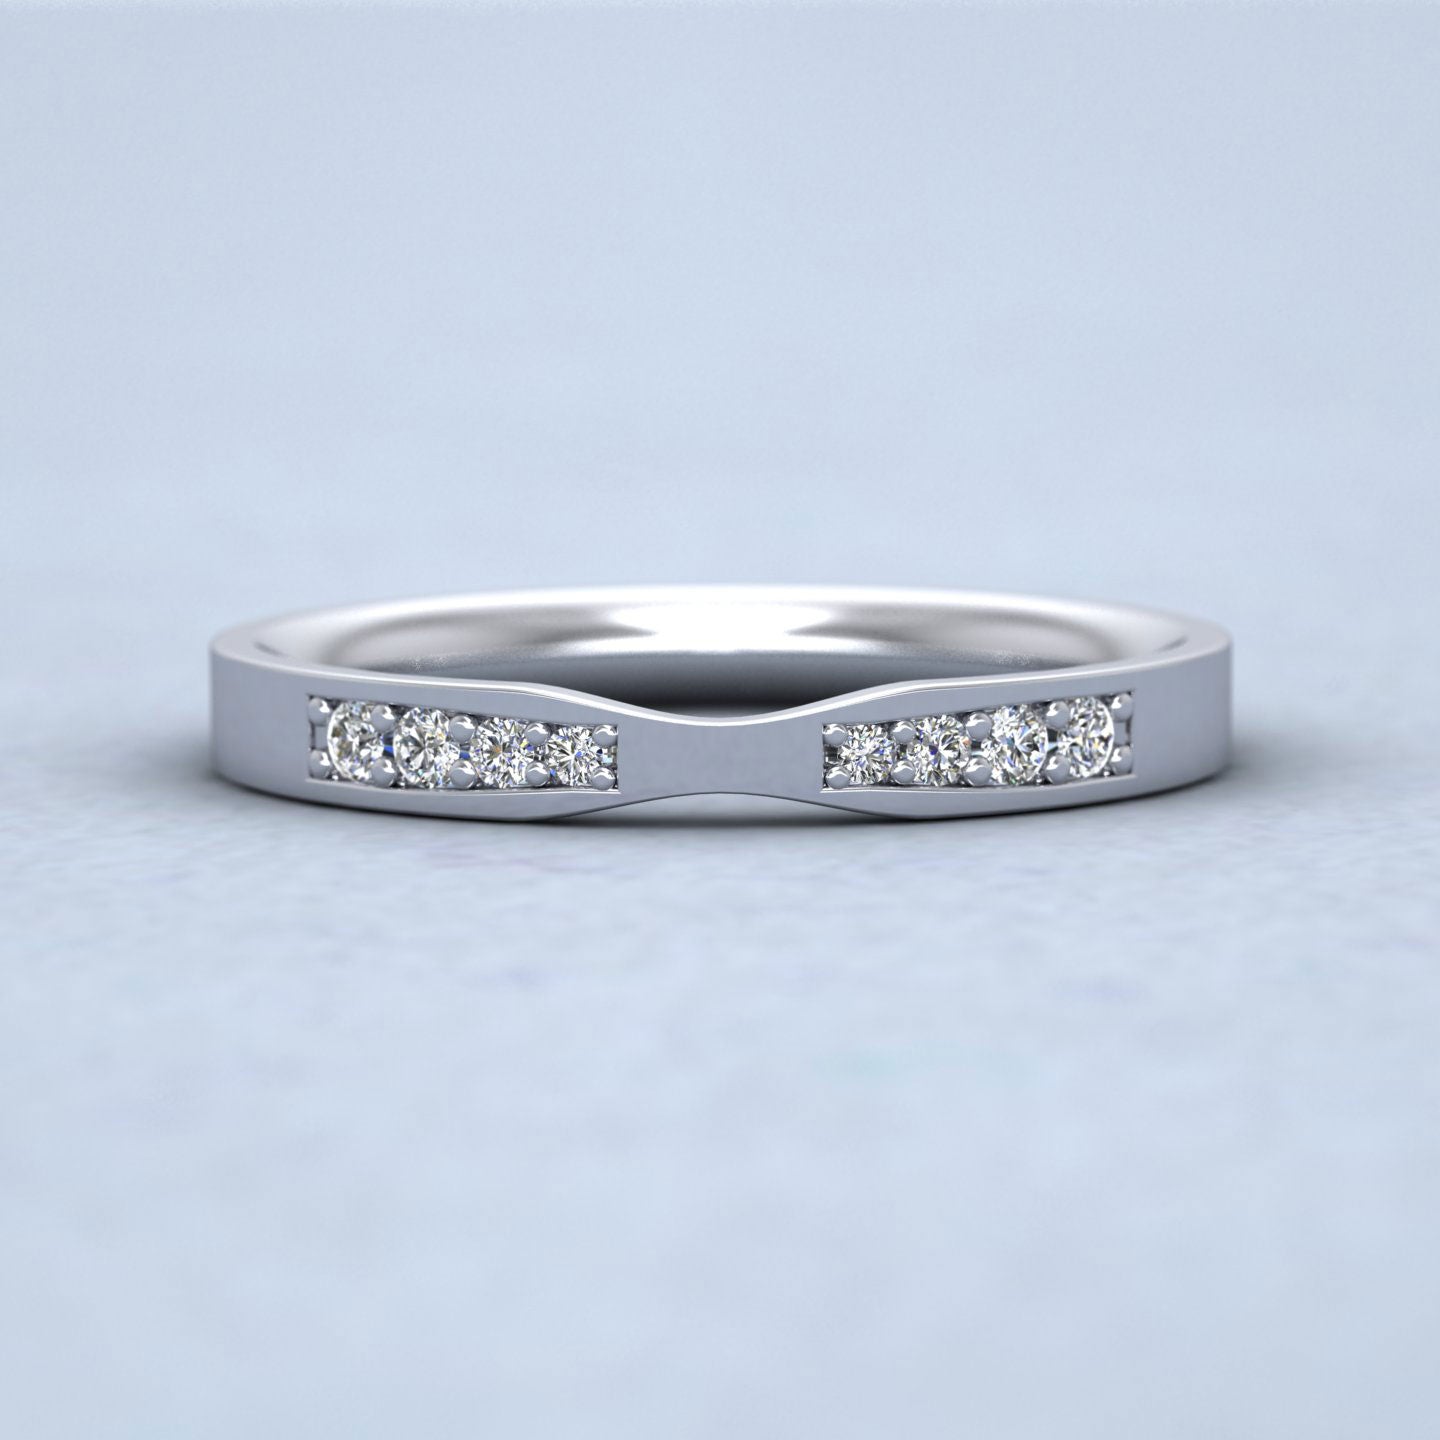 Pinch Shaped Wedding Ring In 18ct White Gold 2.5mm Wide